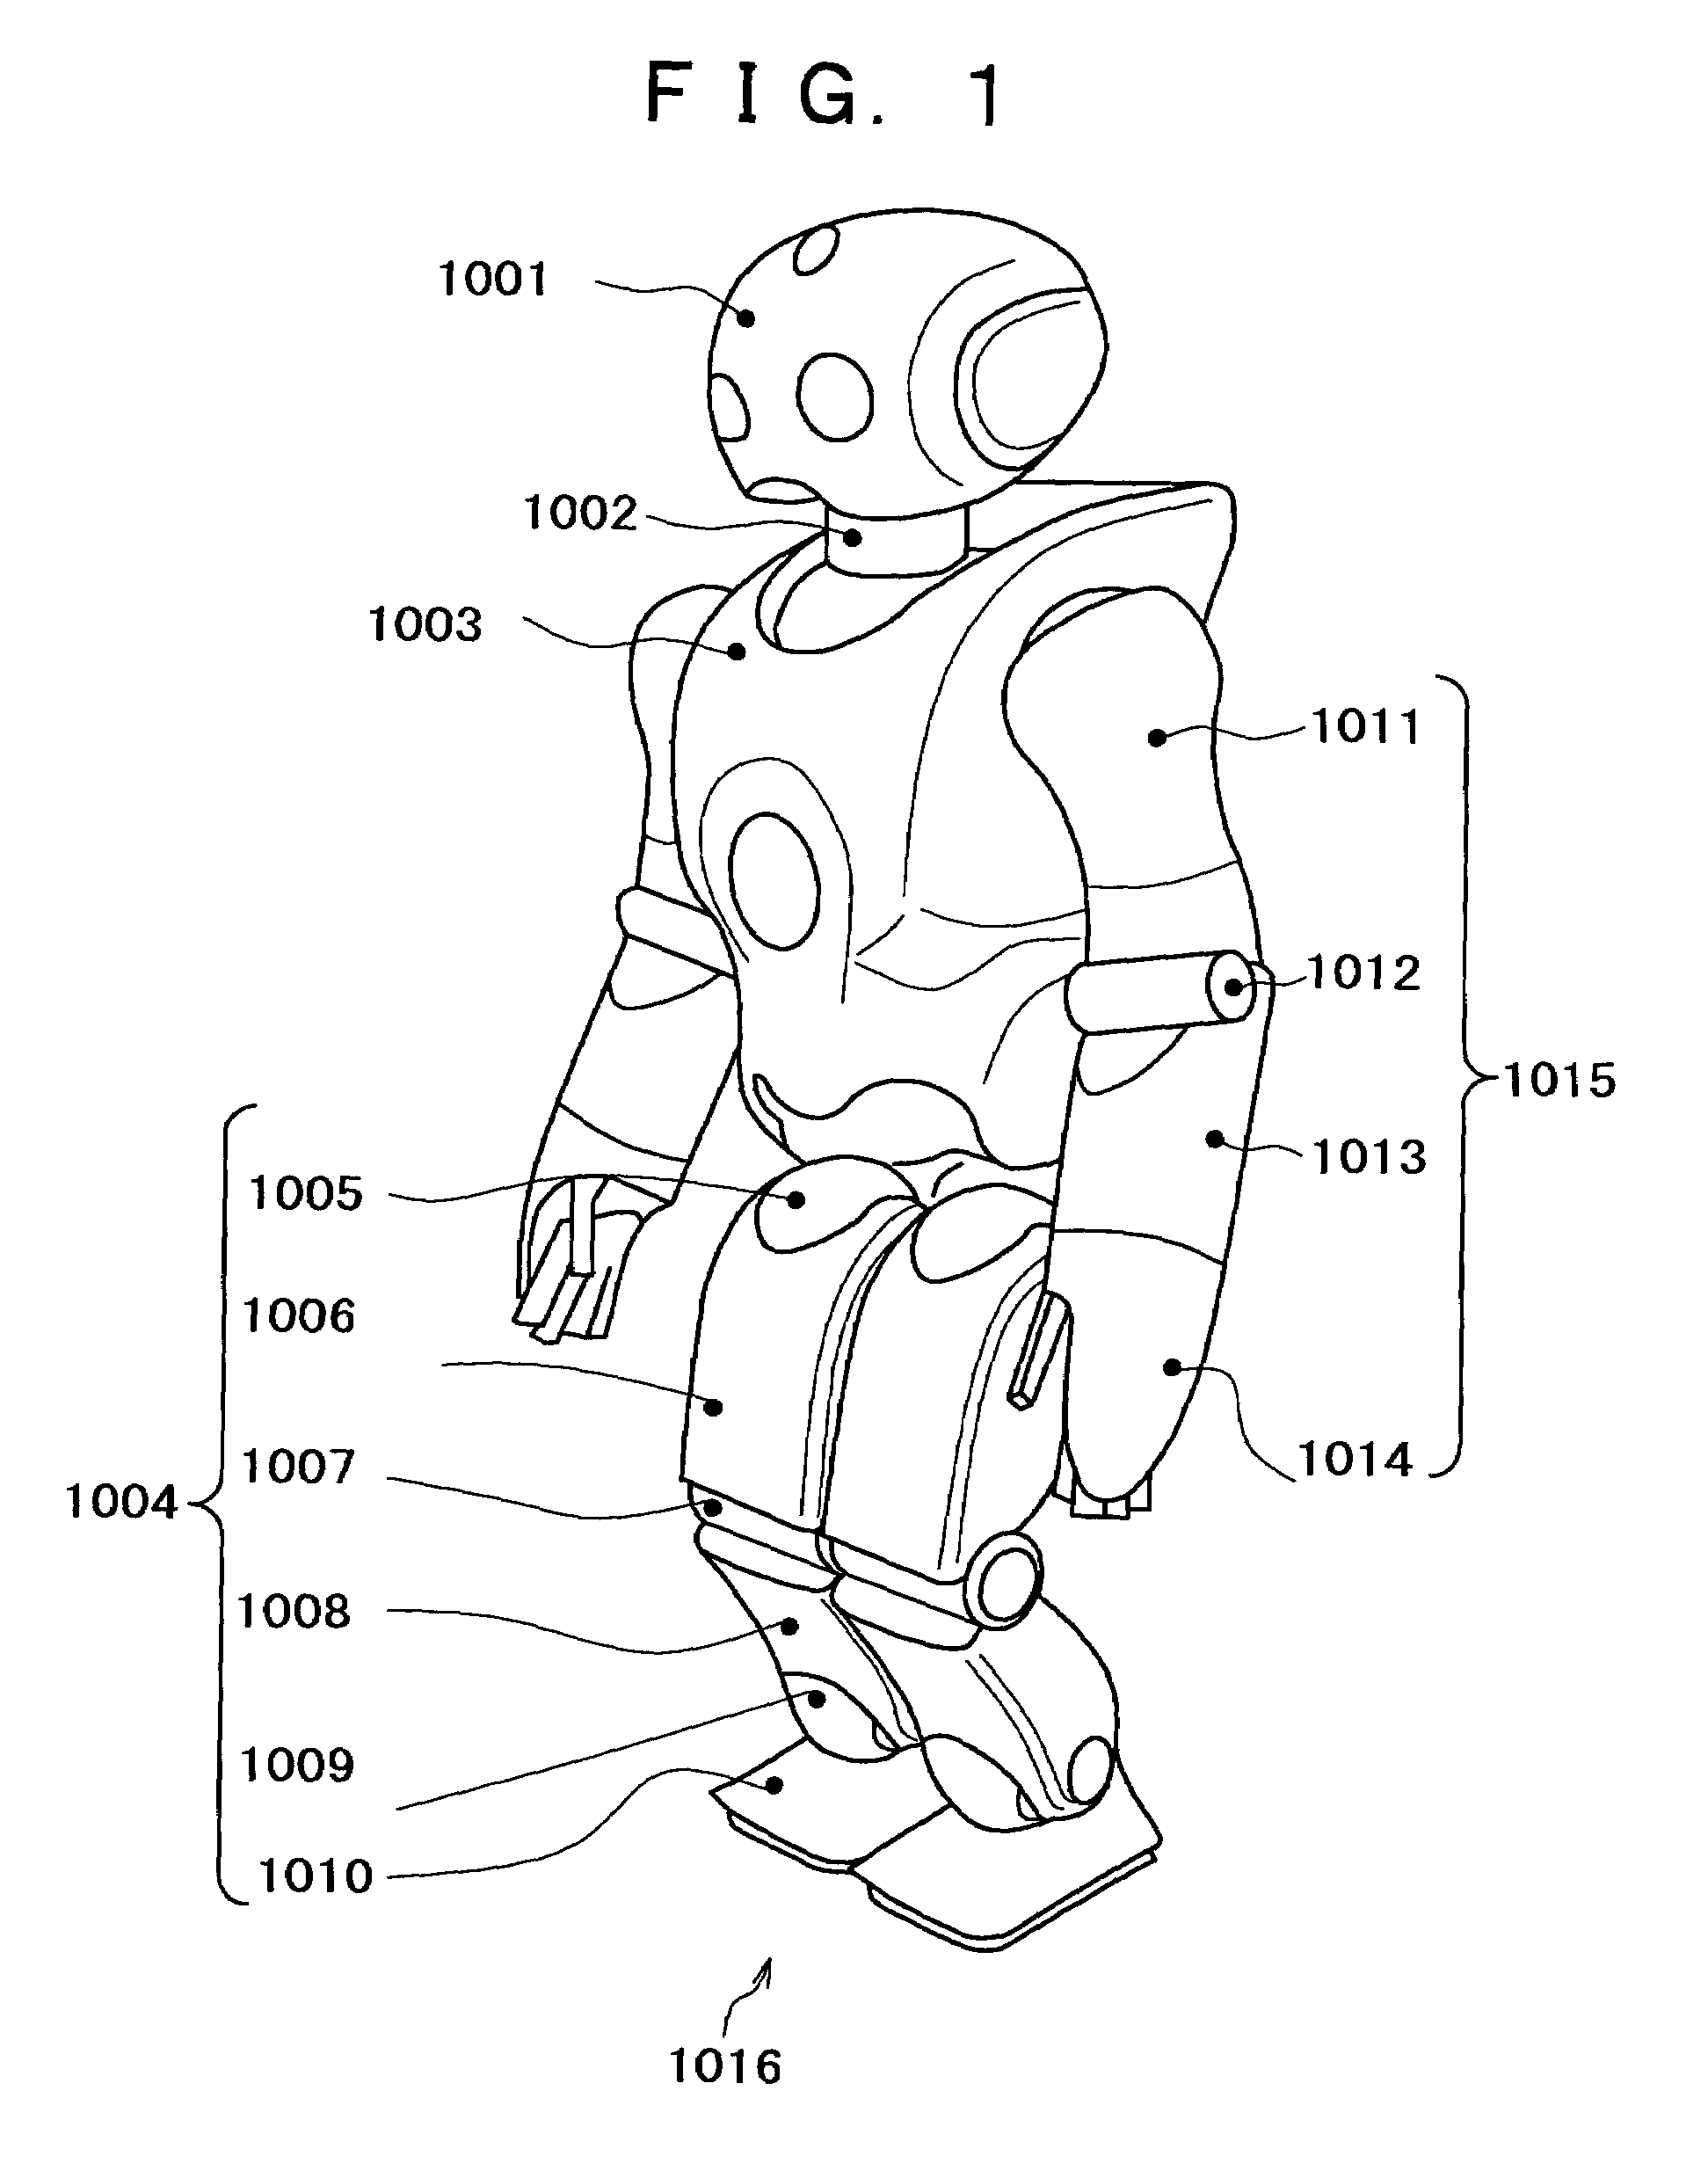 Robot apparatus and motion controlling method therefor